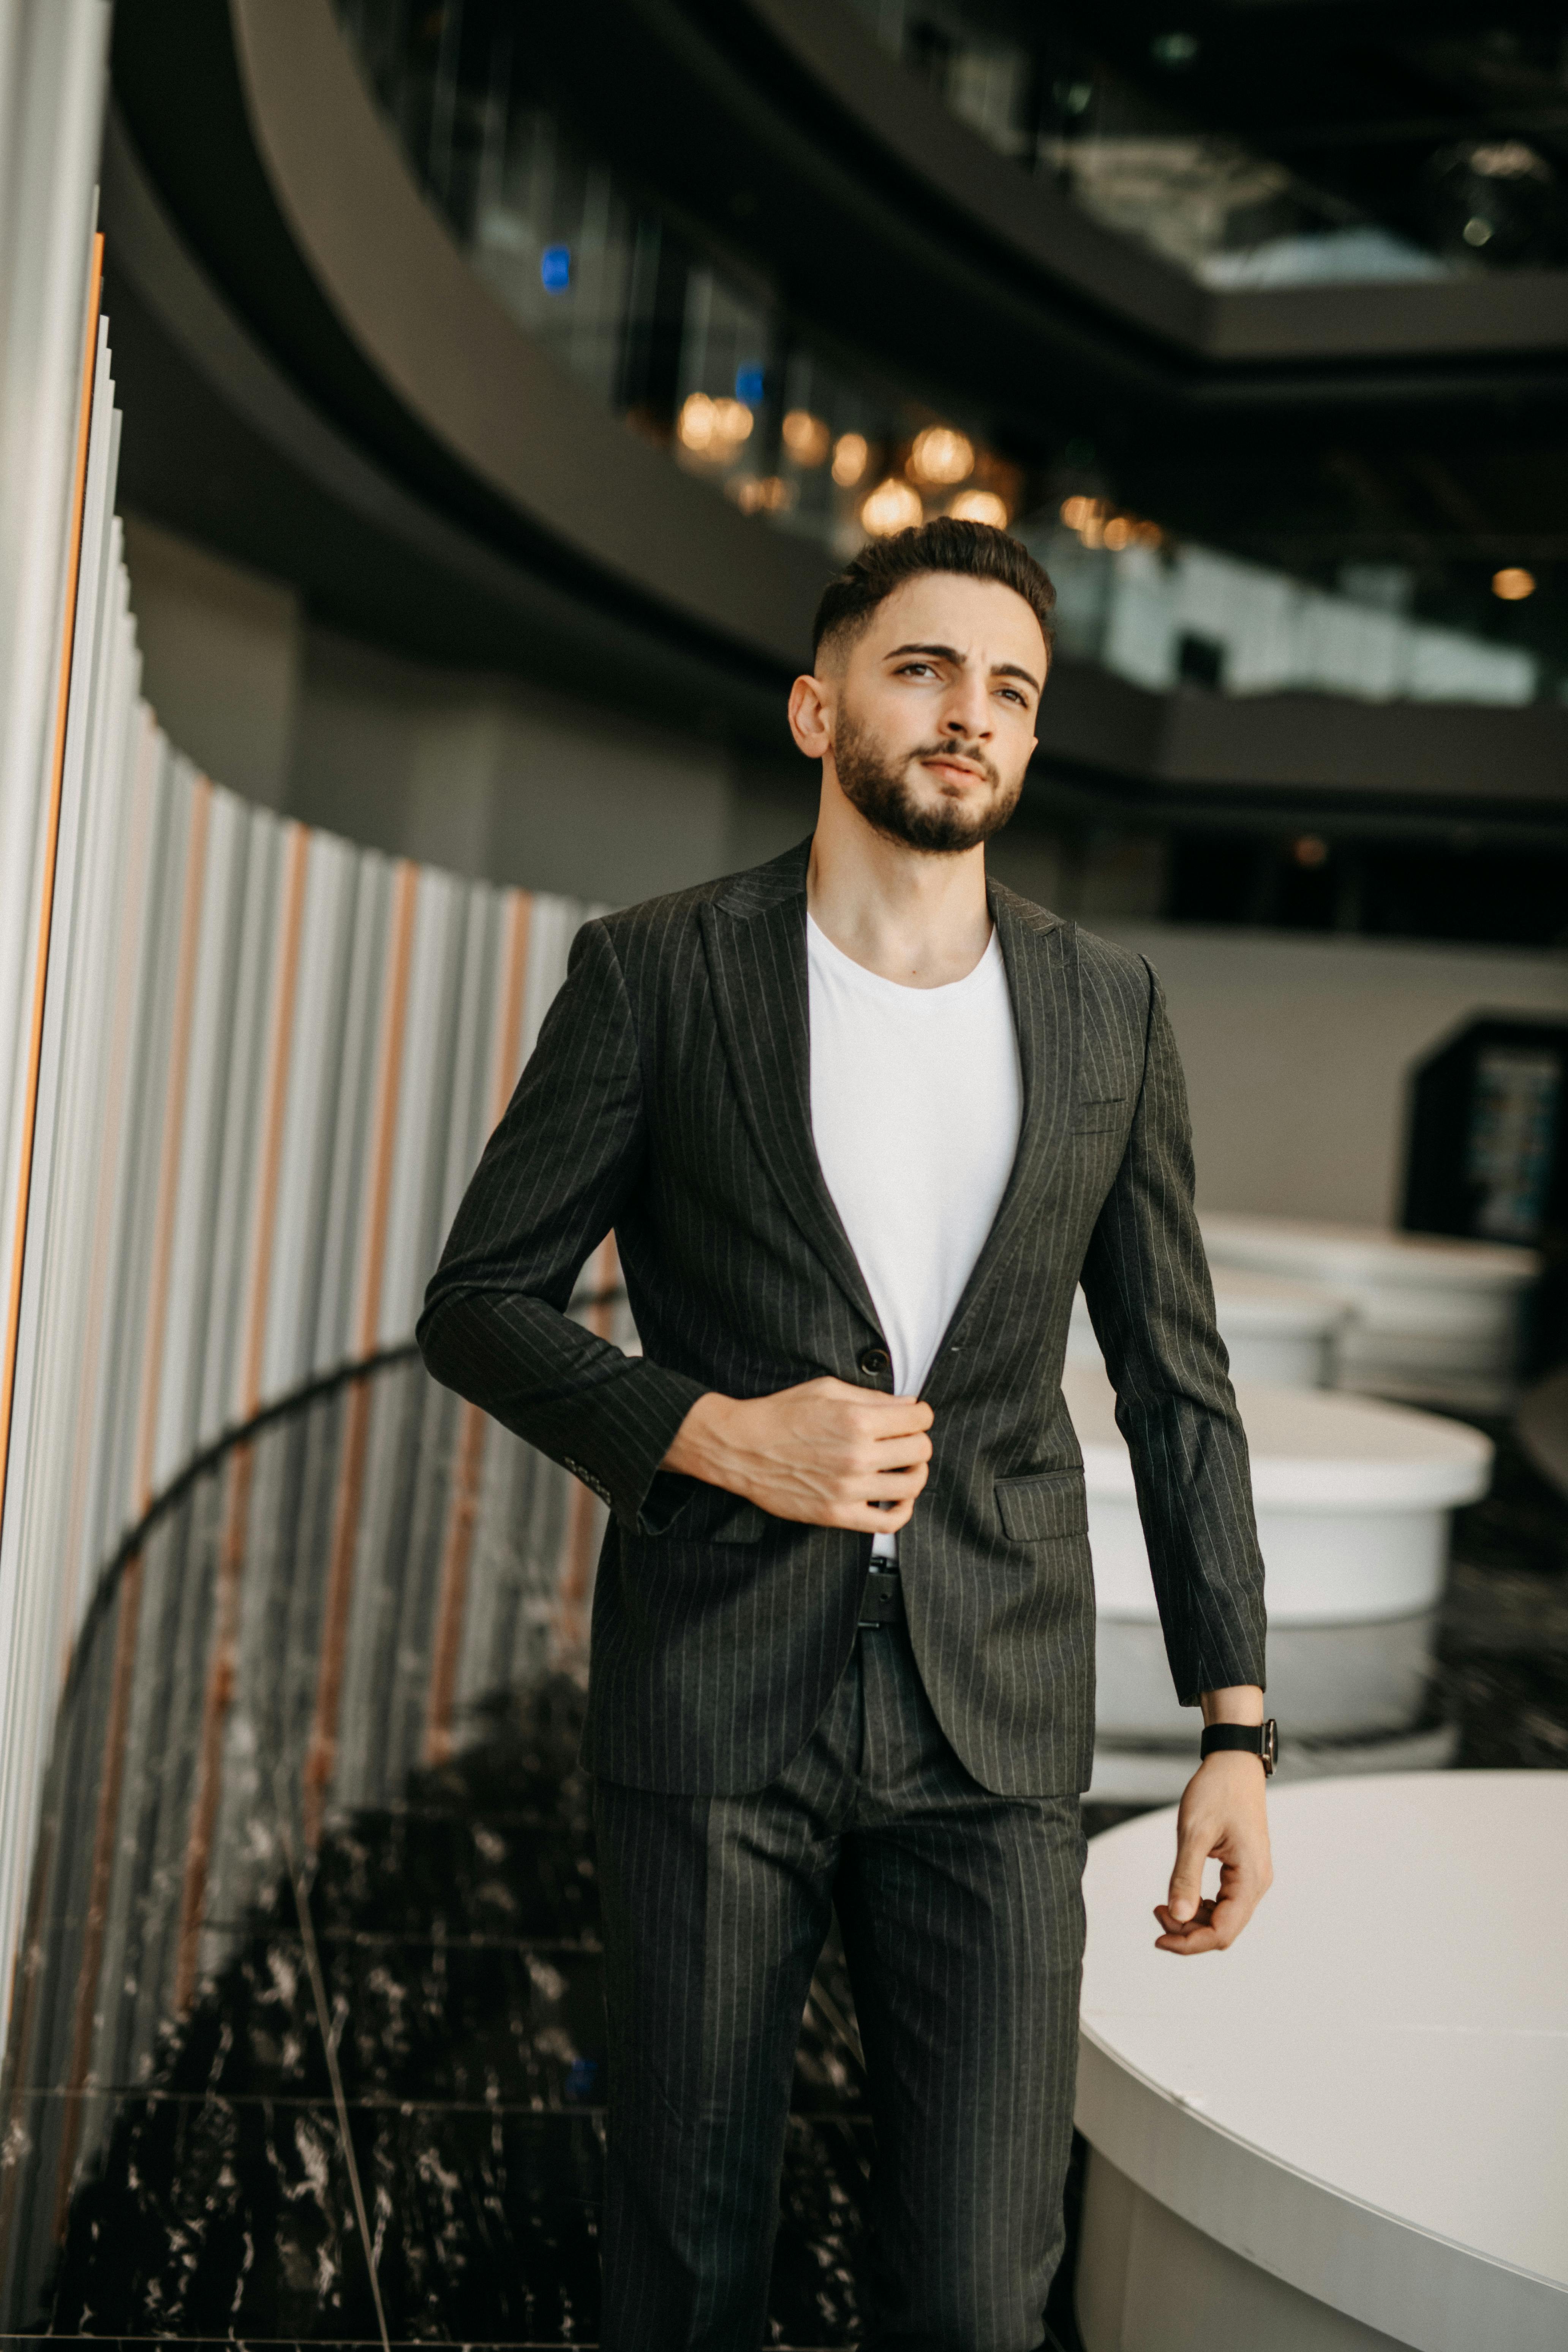 free photo of young man in a suit standing in a modern room